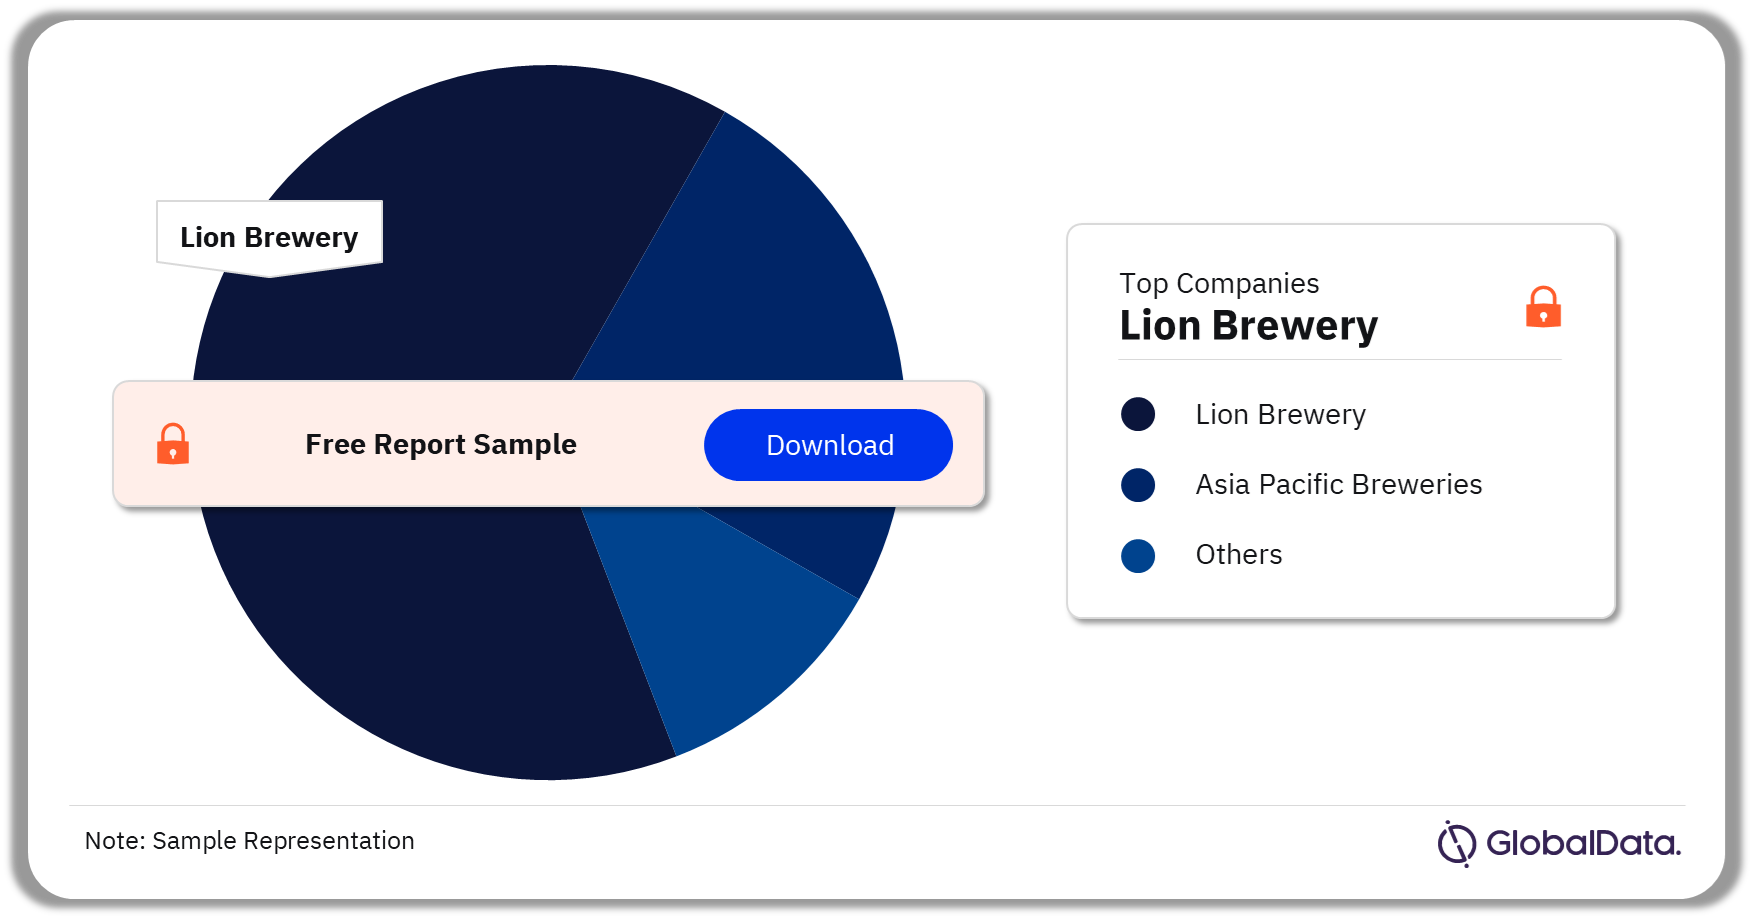 Sri Lanka Beer and Cider Market Analysis by Leading Companies, 2022 (%)